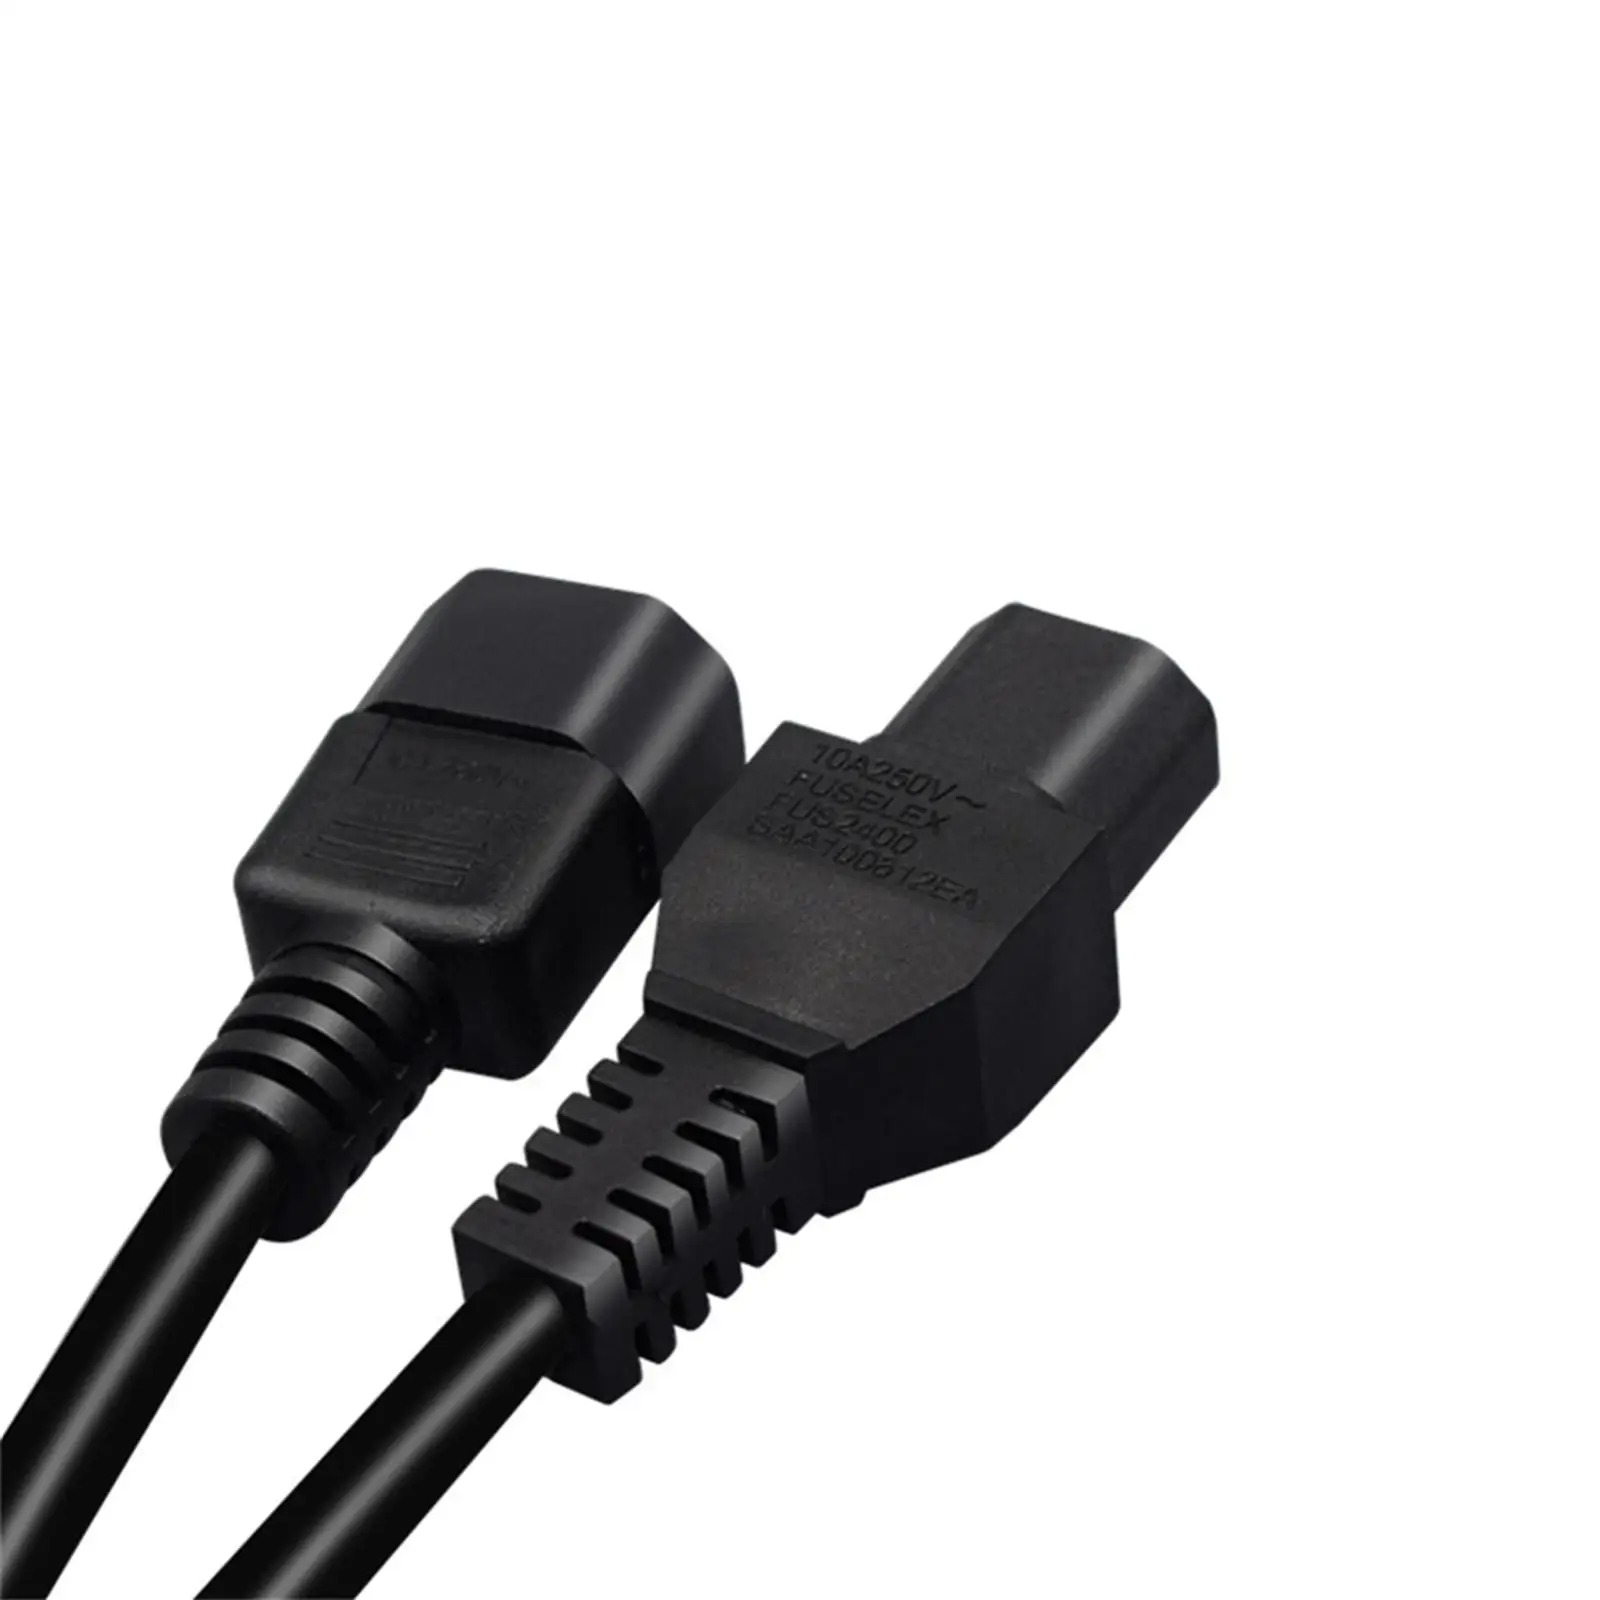 IEC320-C14 to IEC320-C15 Computer Power Extension Cord Black for Accessory